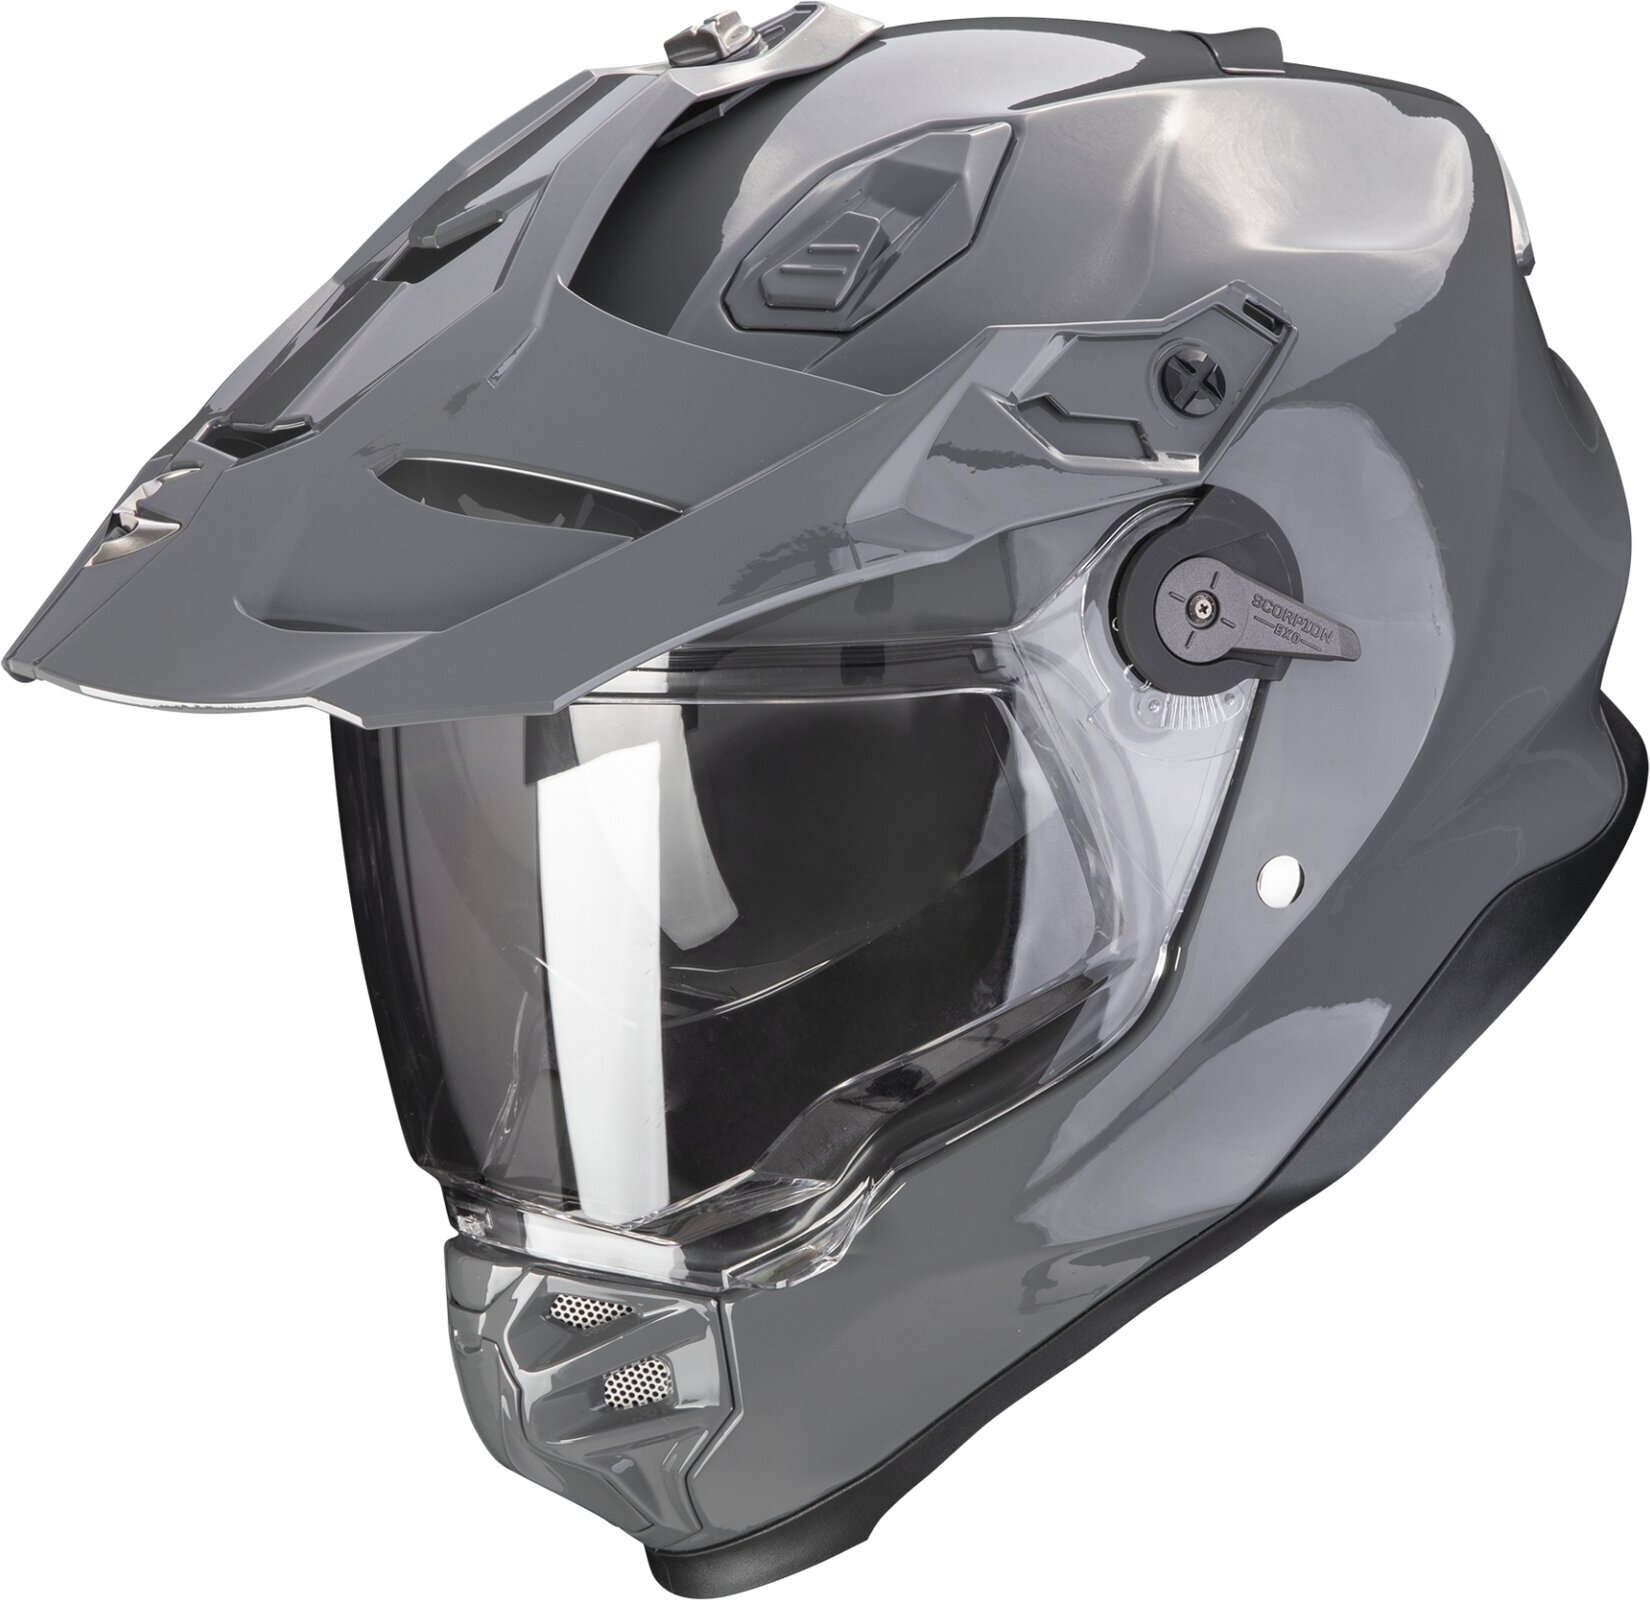 Helm Scorpion ADF-9000 AIR SOLID Cement Grey L Helm